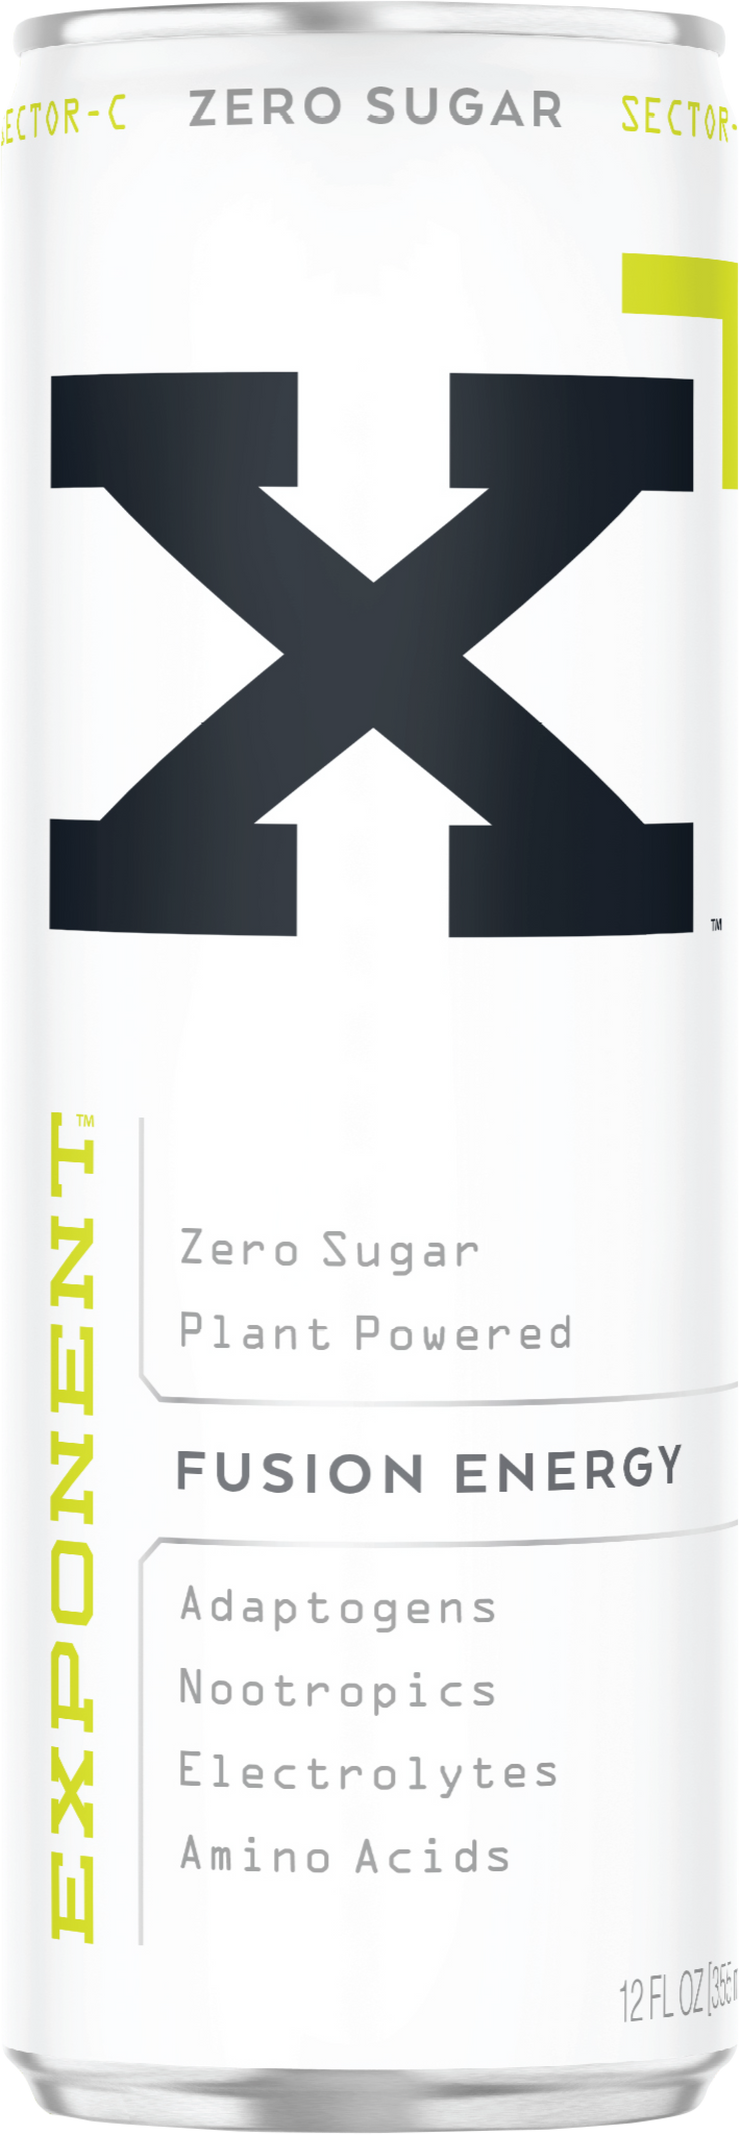 A can of Exponent Energy - Eclipse Plant - Based Energy Drink